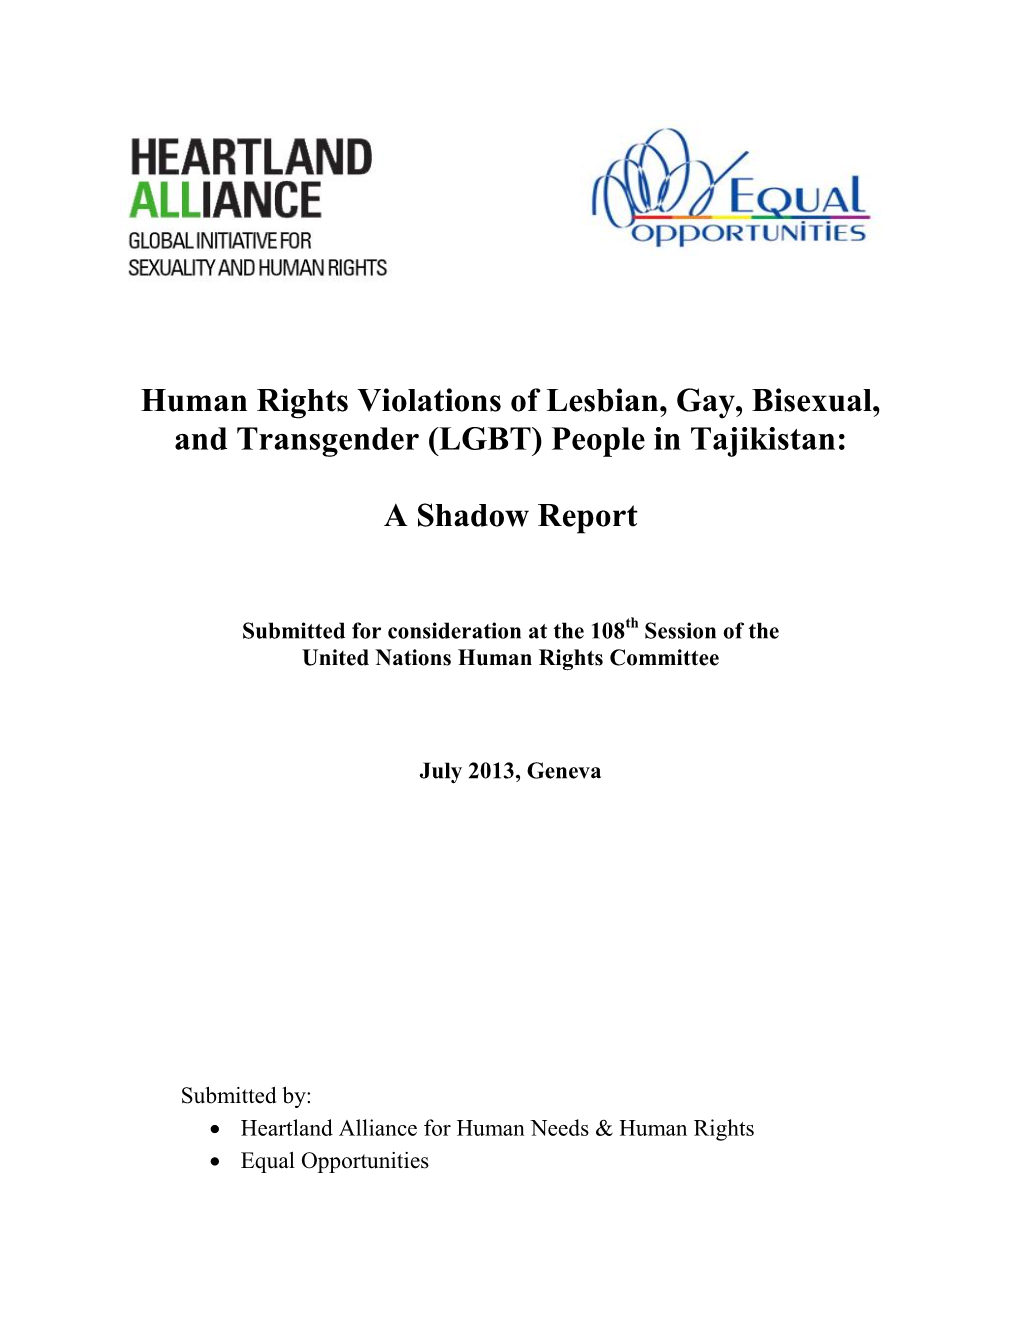 Human Rights Violations of Lesbian, Gay, Bisexual, and Transgender (LGBT) People in Tajikistan